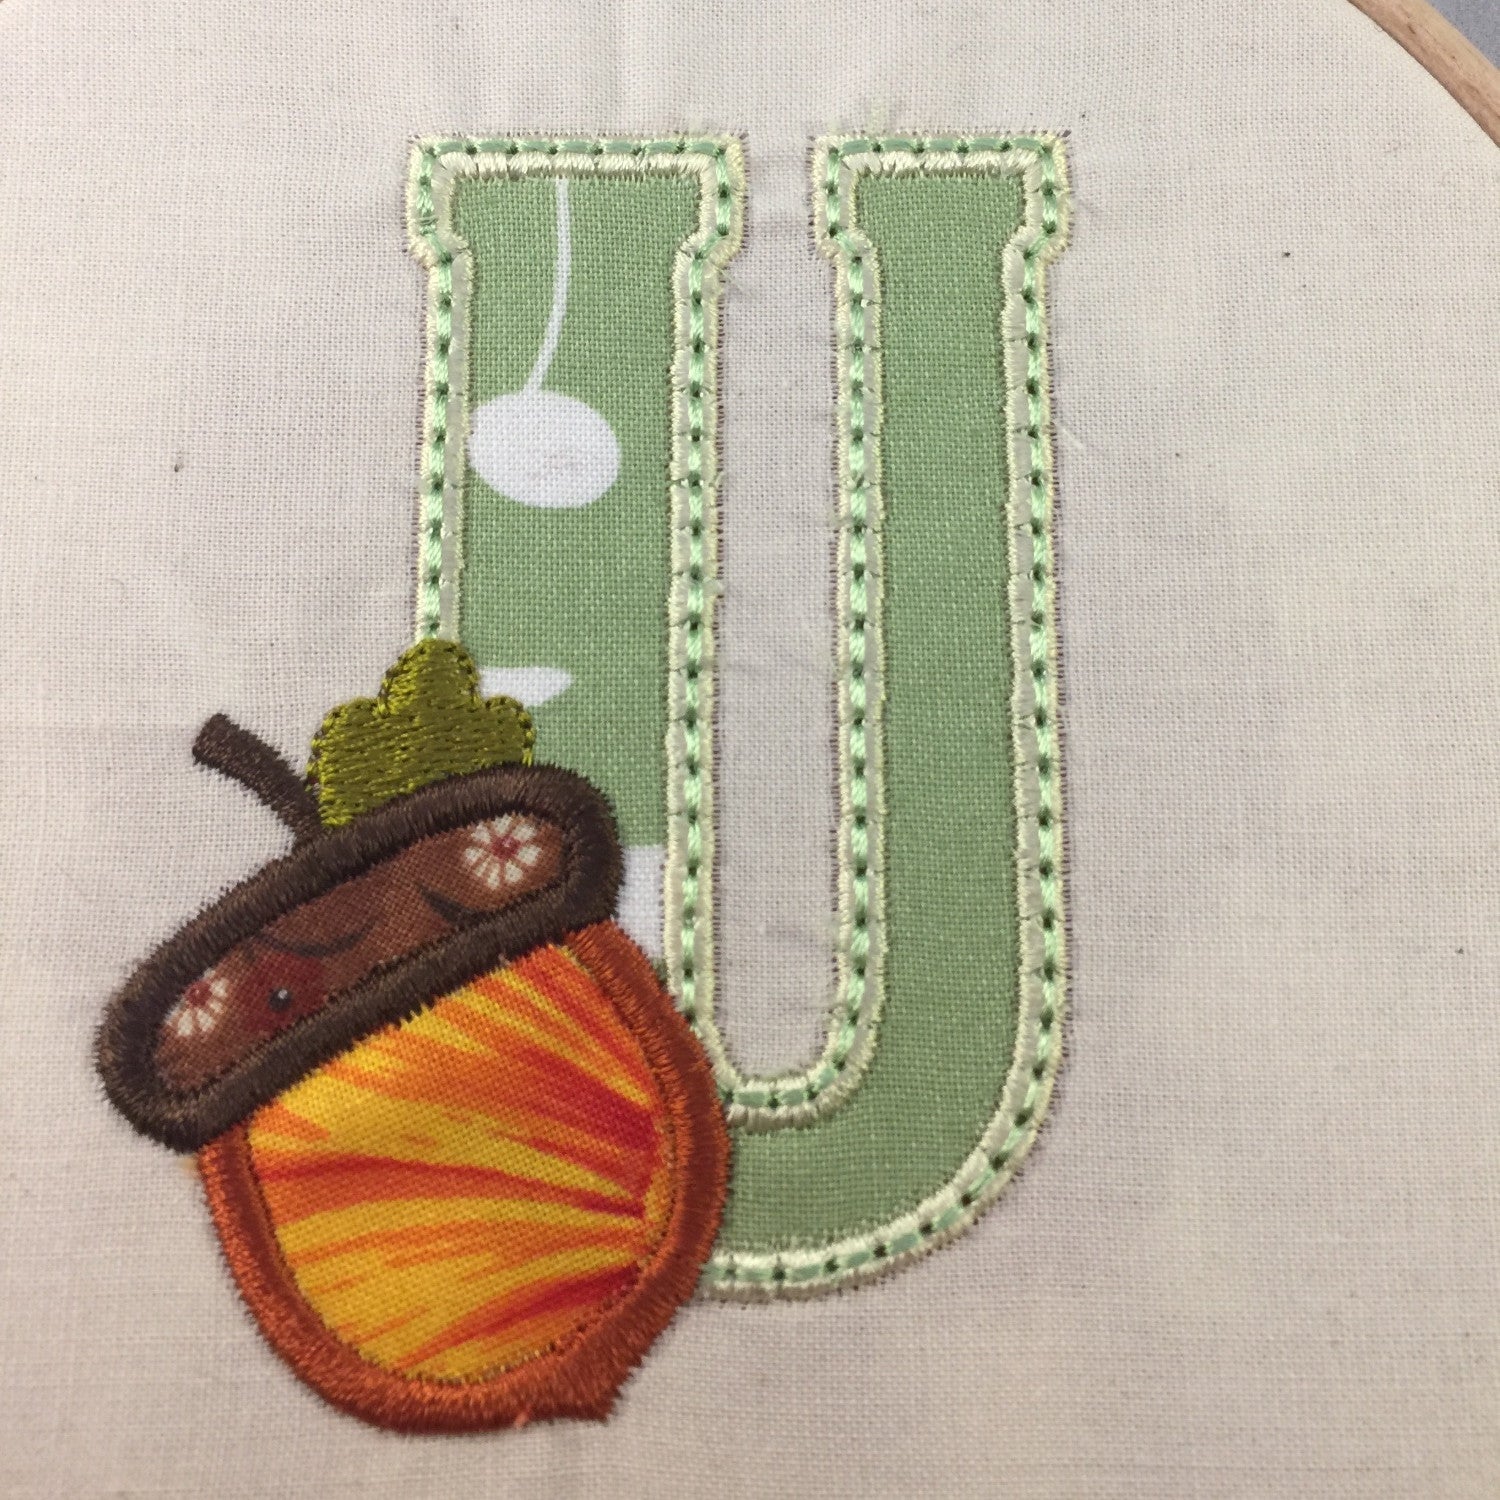 Wall Art with Appliqué Embroidery - Alessandra Handmade Creations